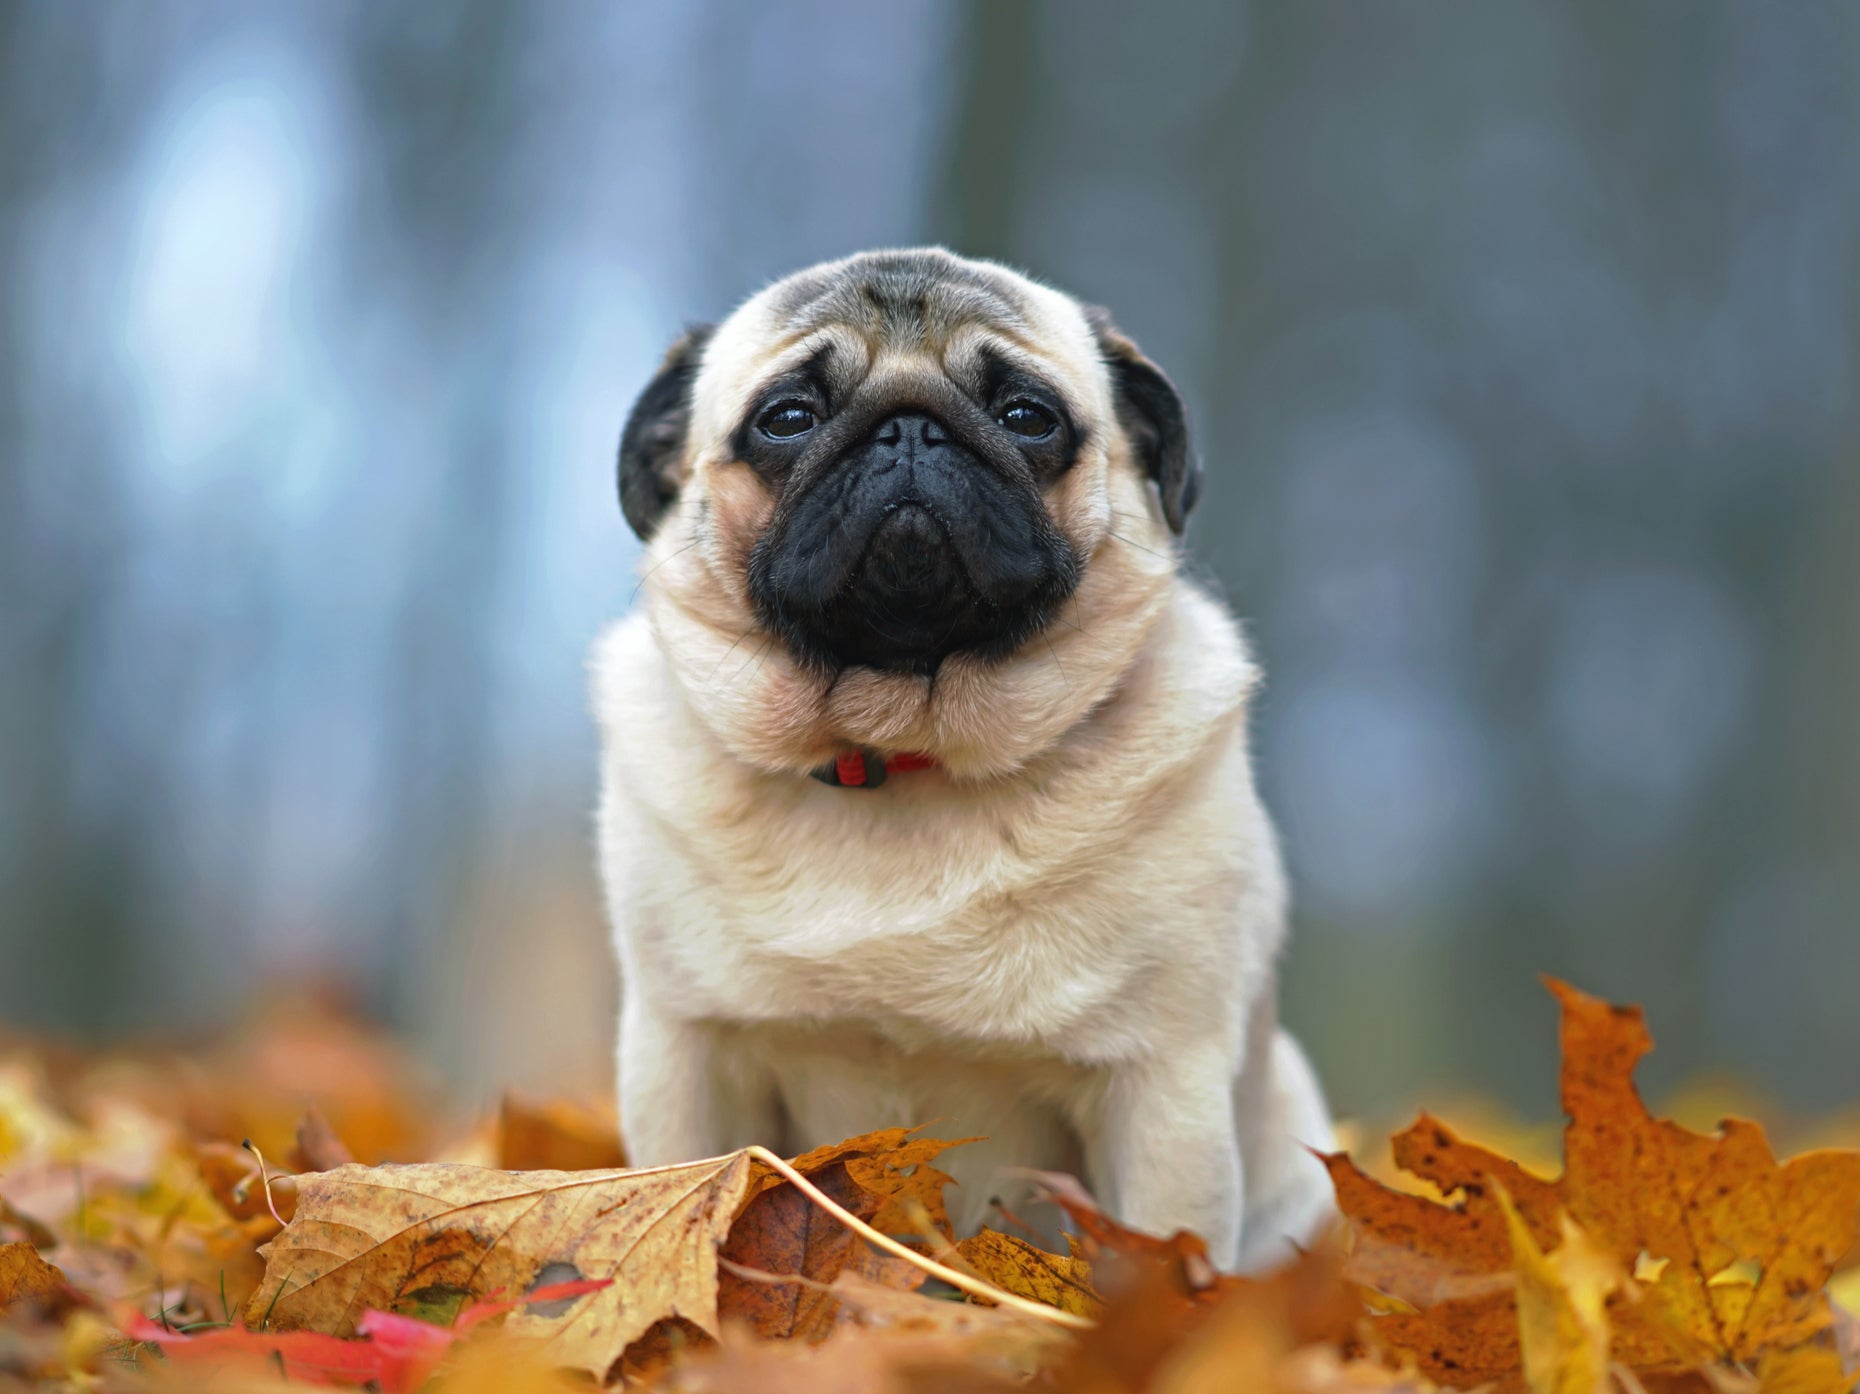 Thanks to inbreeding, bulldogs and pugs may not exist much longer